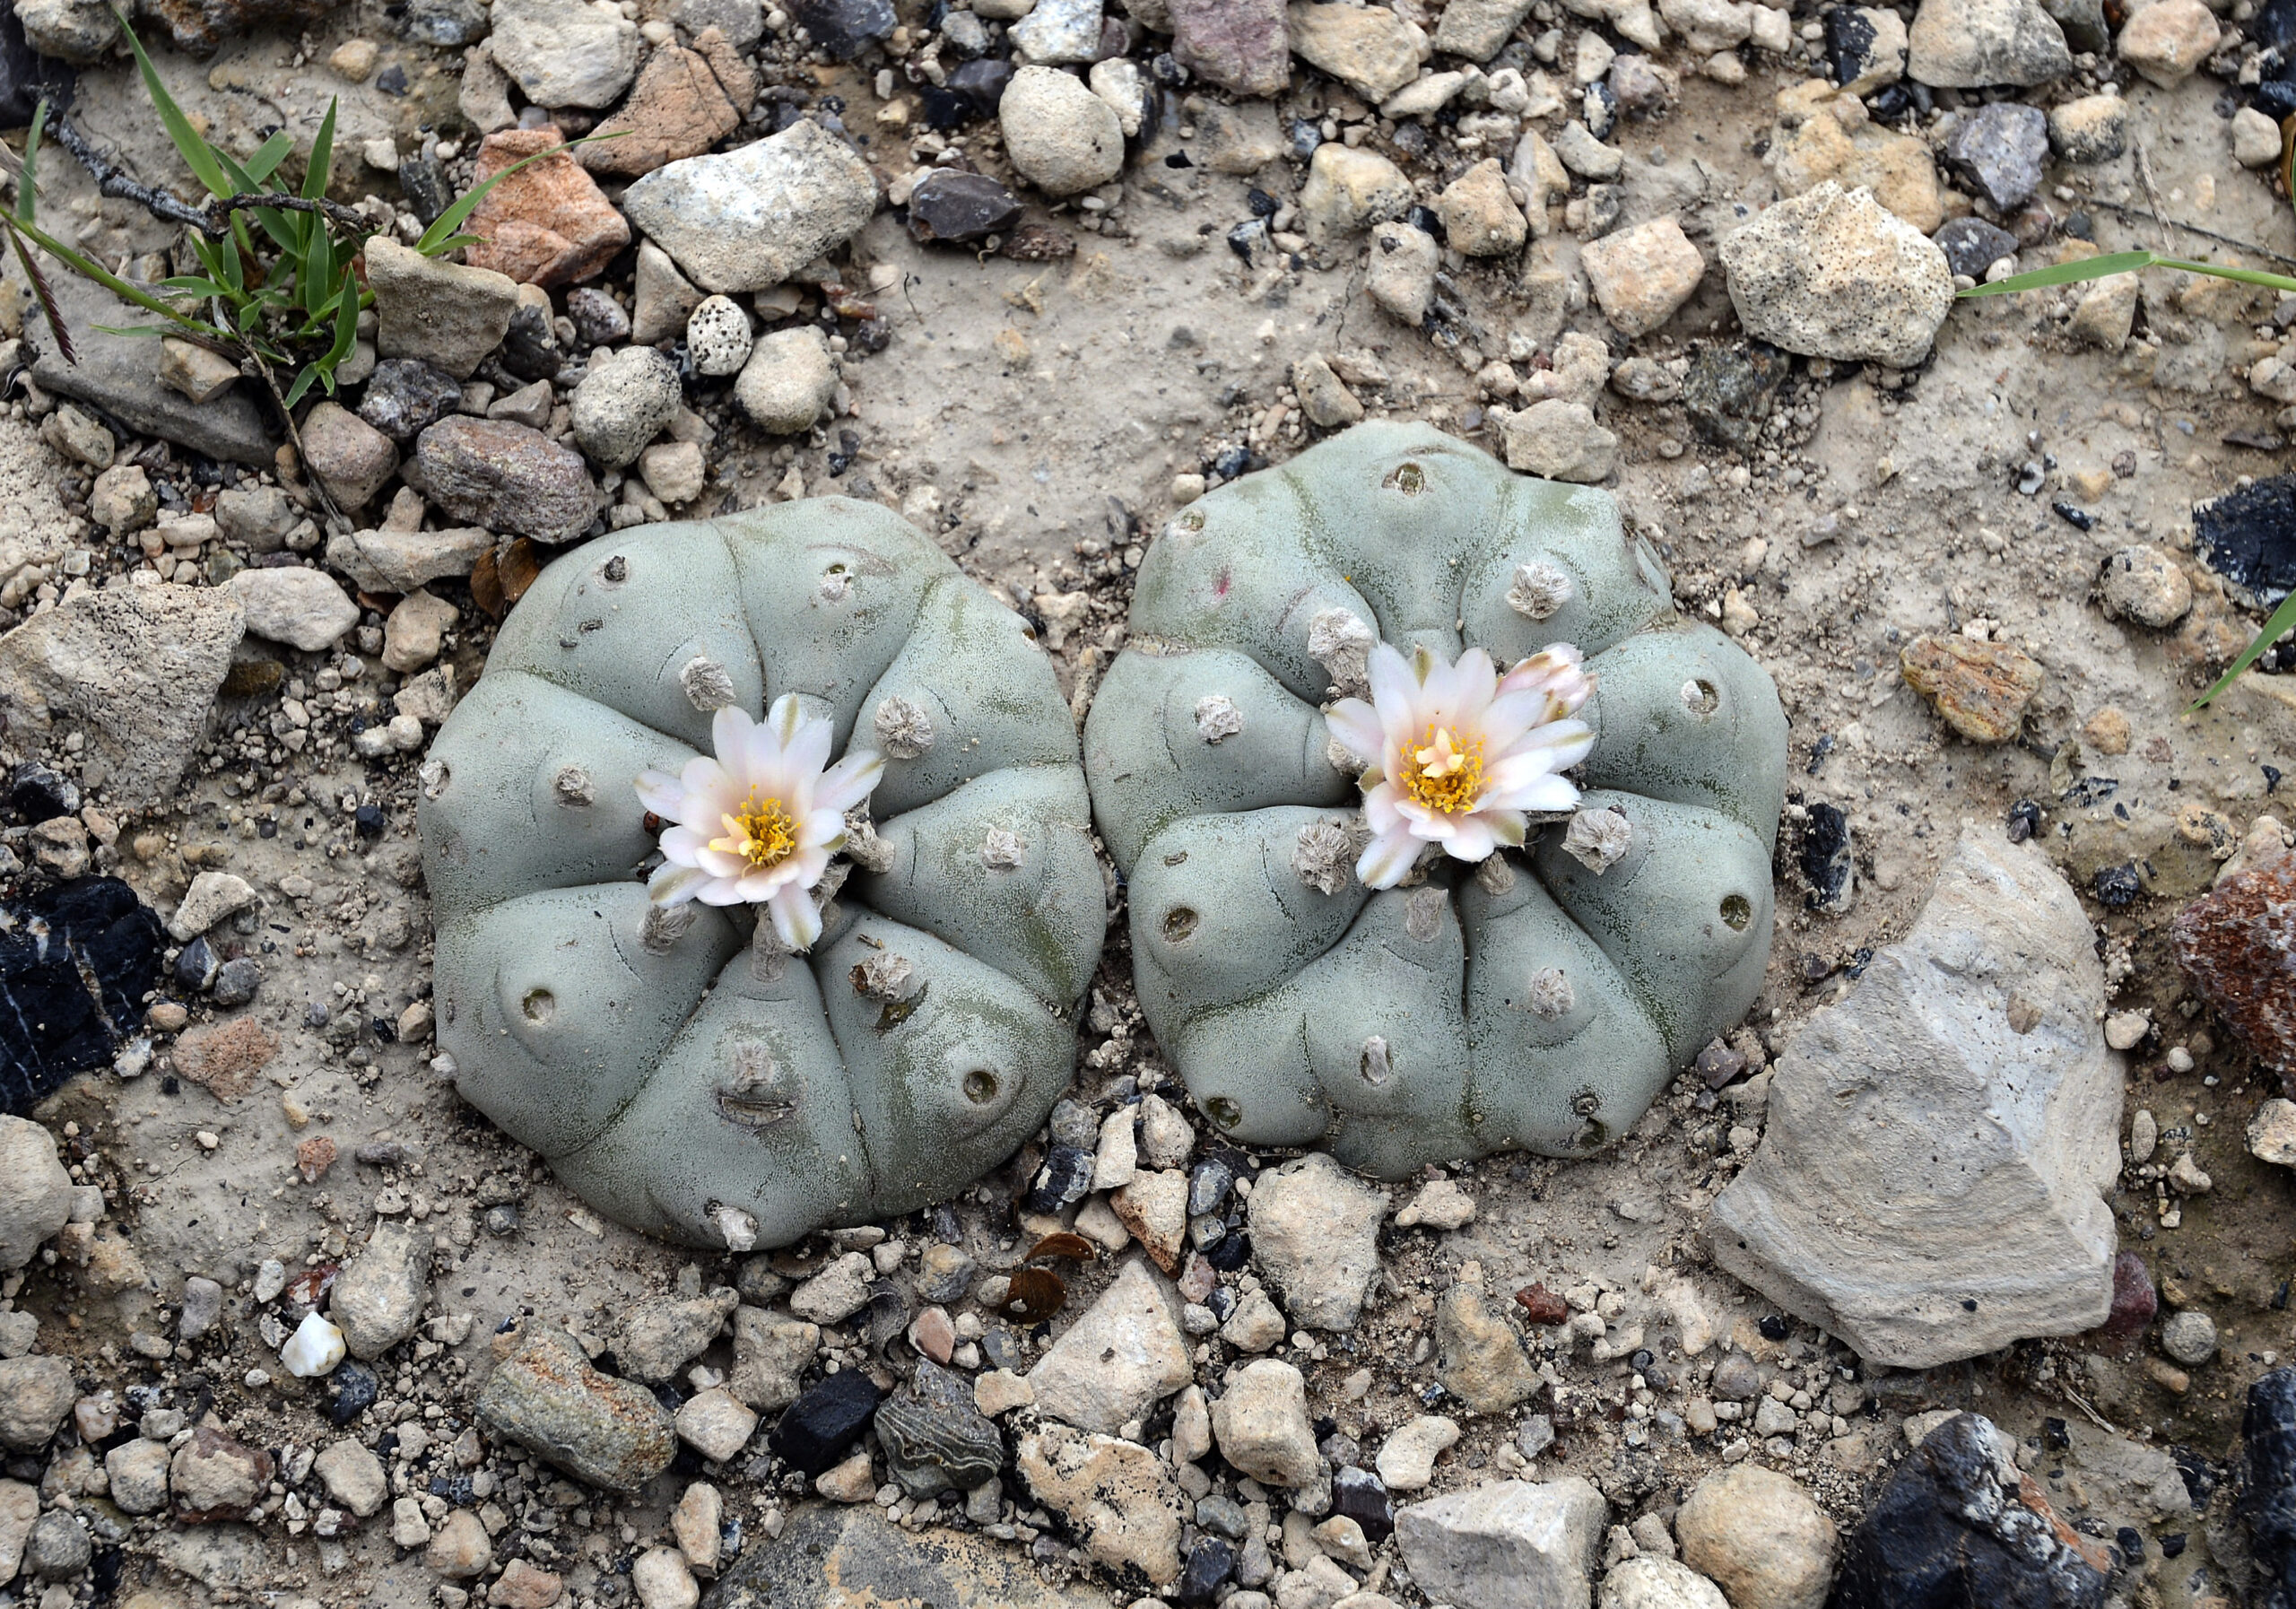 Native American Leaders Are Asking Congress to Help Fund Peyote Preservation